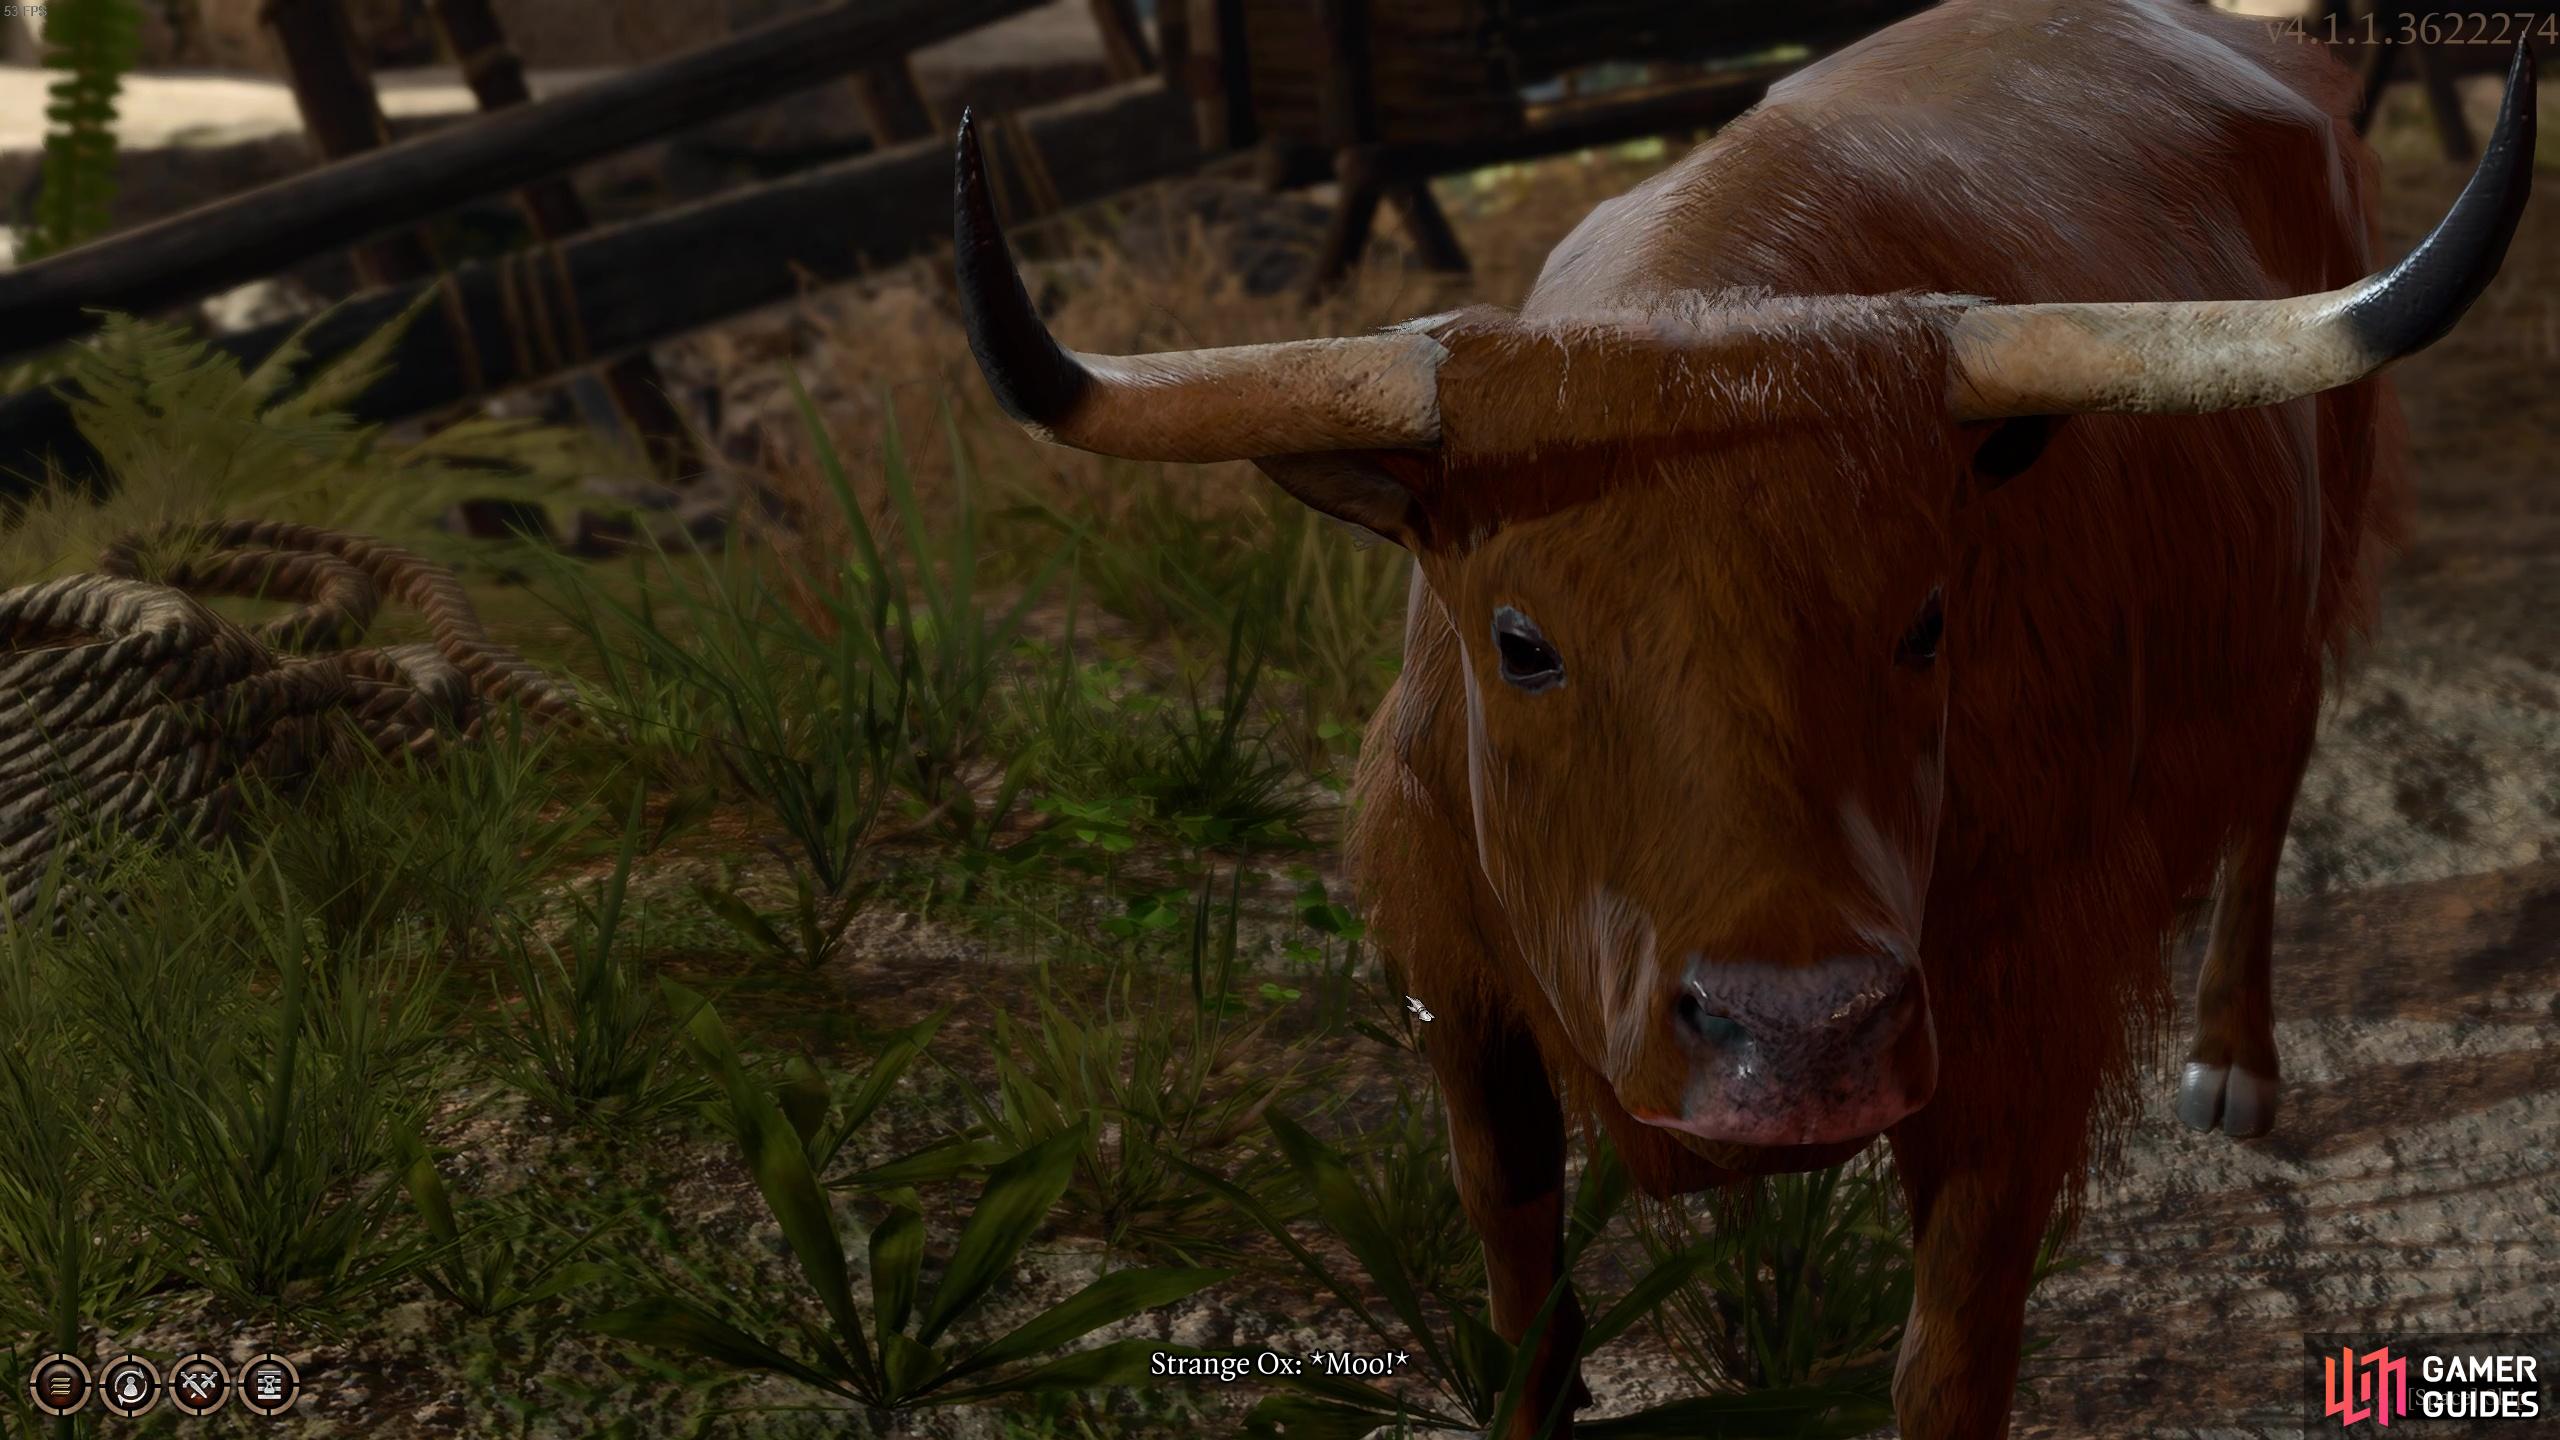 There’s something strange going on with this Ox…we’ll tell you how to uncover his secrets!